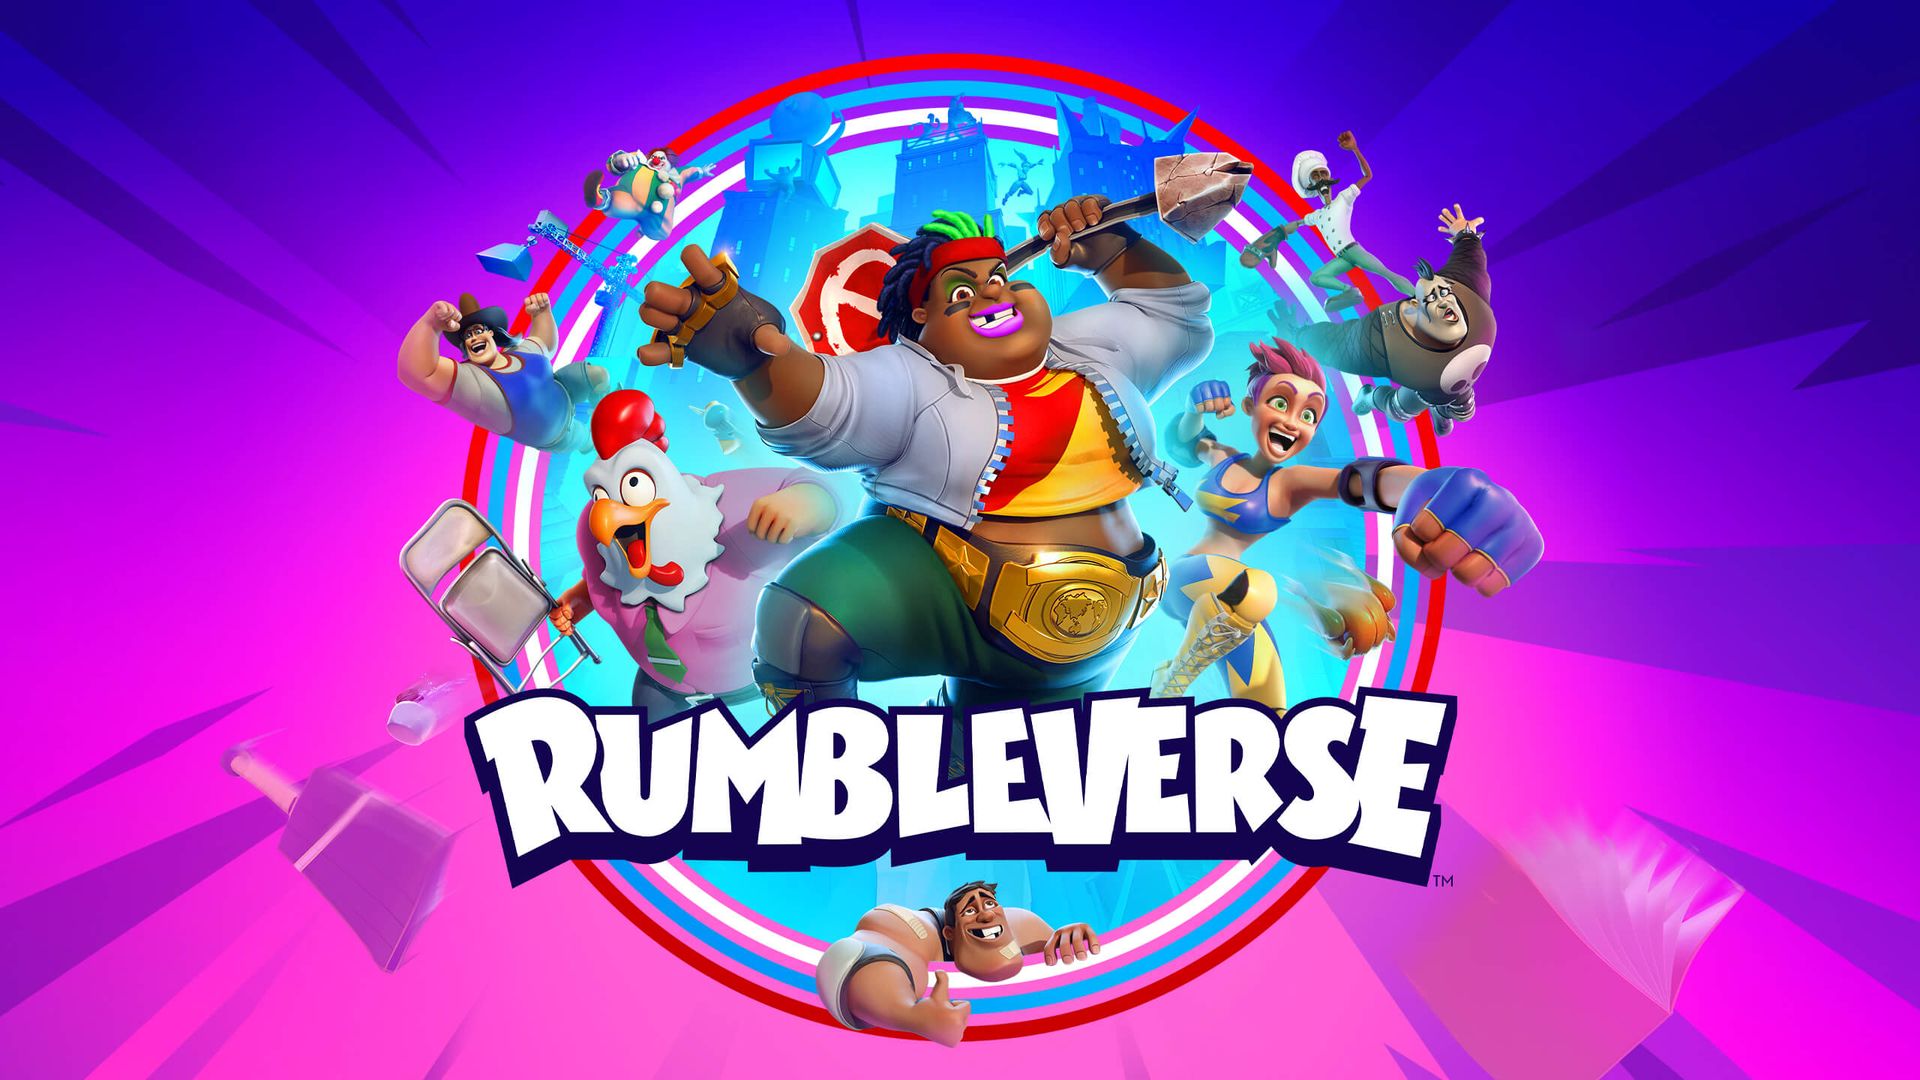 If you are excited about this upcoming brawler royale game, we've got good news, Rumbleverse duos mode will be featured at launch for all to enjoy.